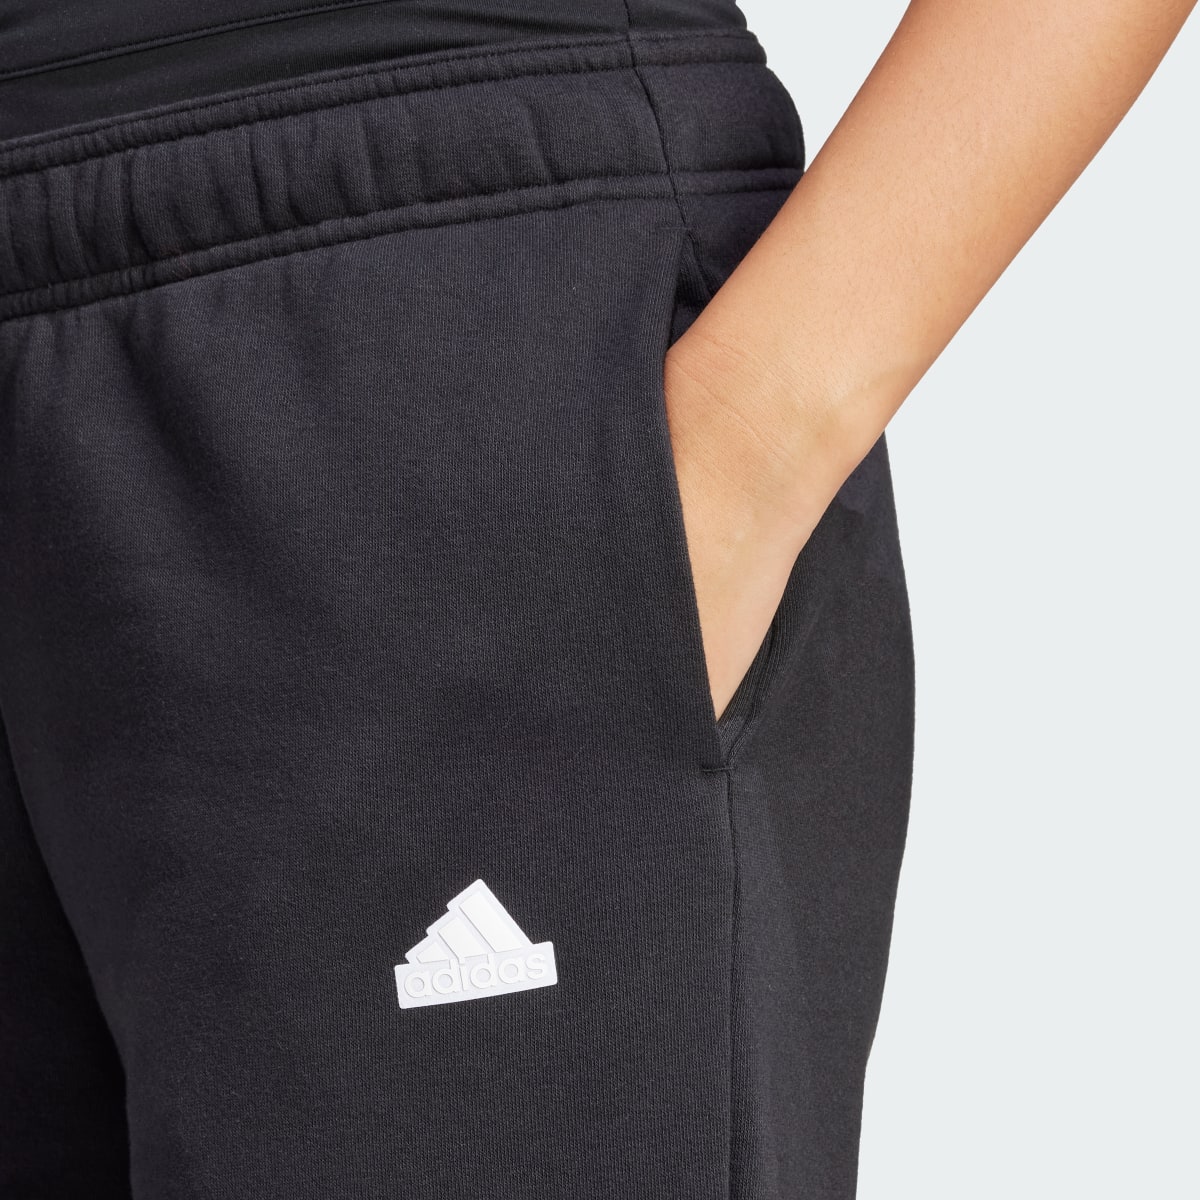 Adidas Express All-Gender Anti-Microbial Joggers. 5